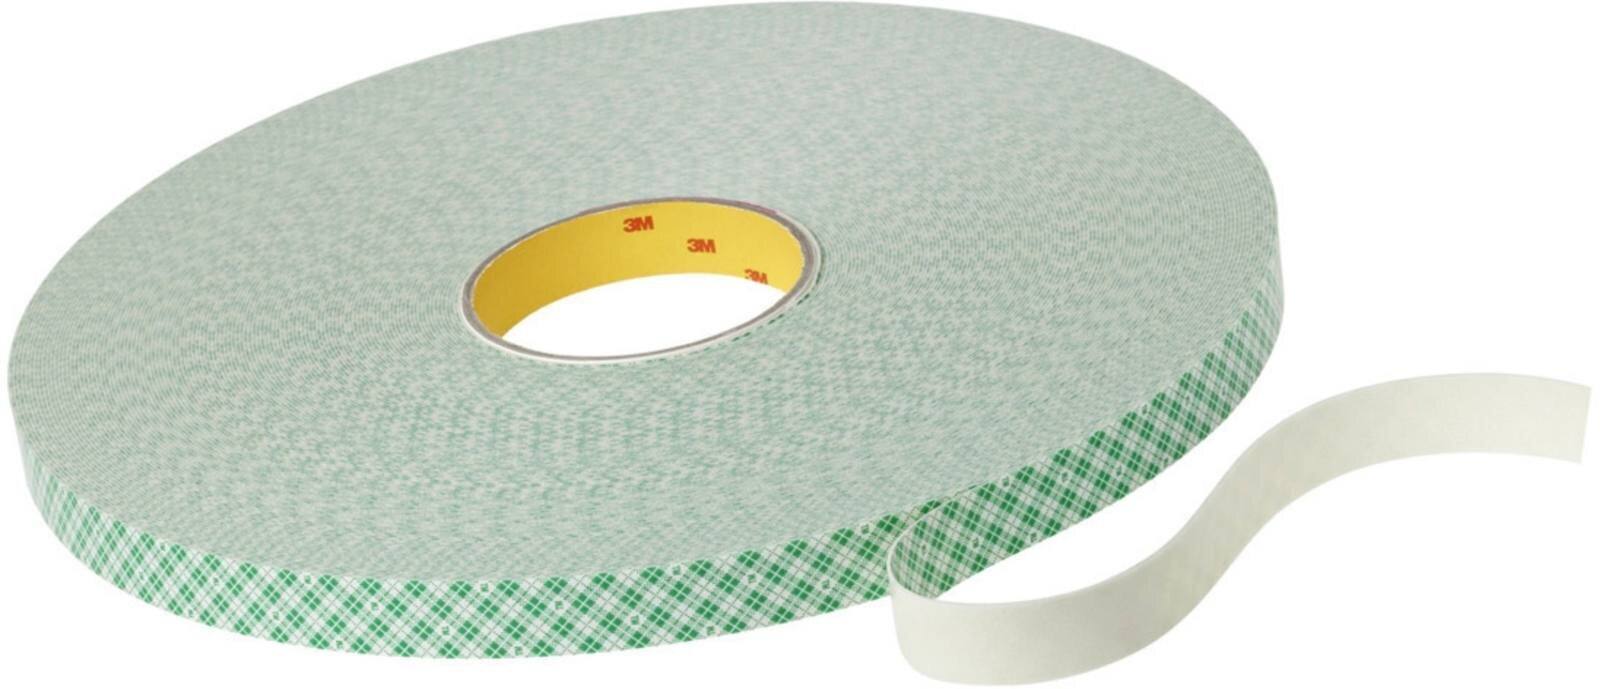 3M PU foam adhesive tape with acrylic adhesive 4032, beige, 6 mm x 66 m, 0.8 mm